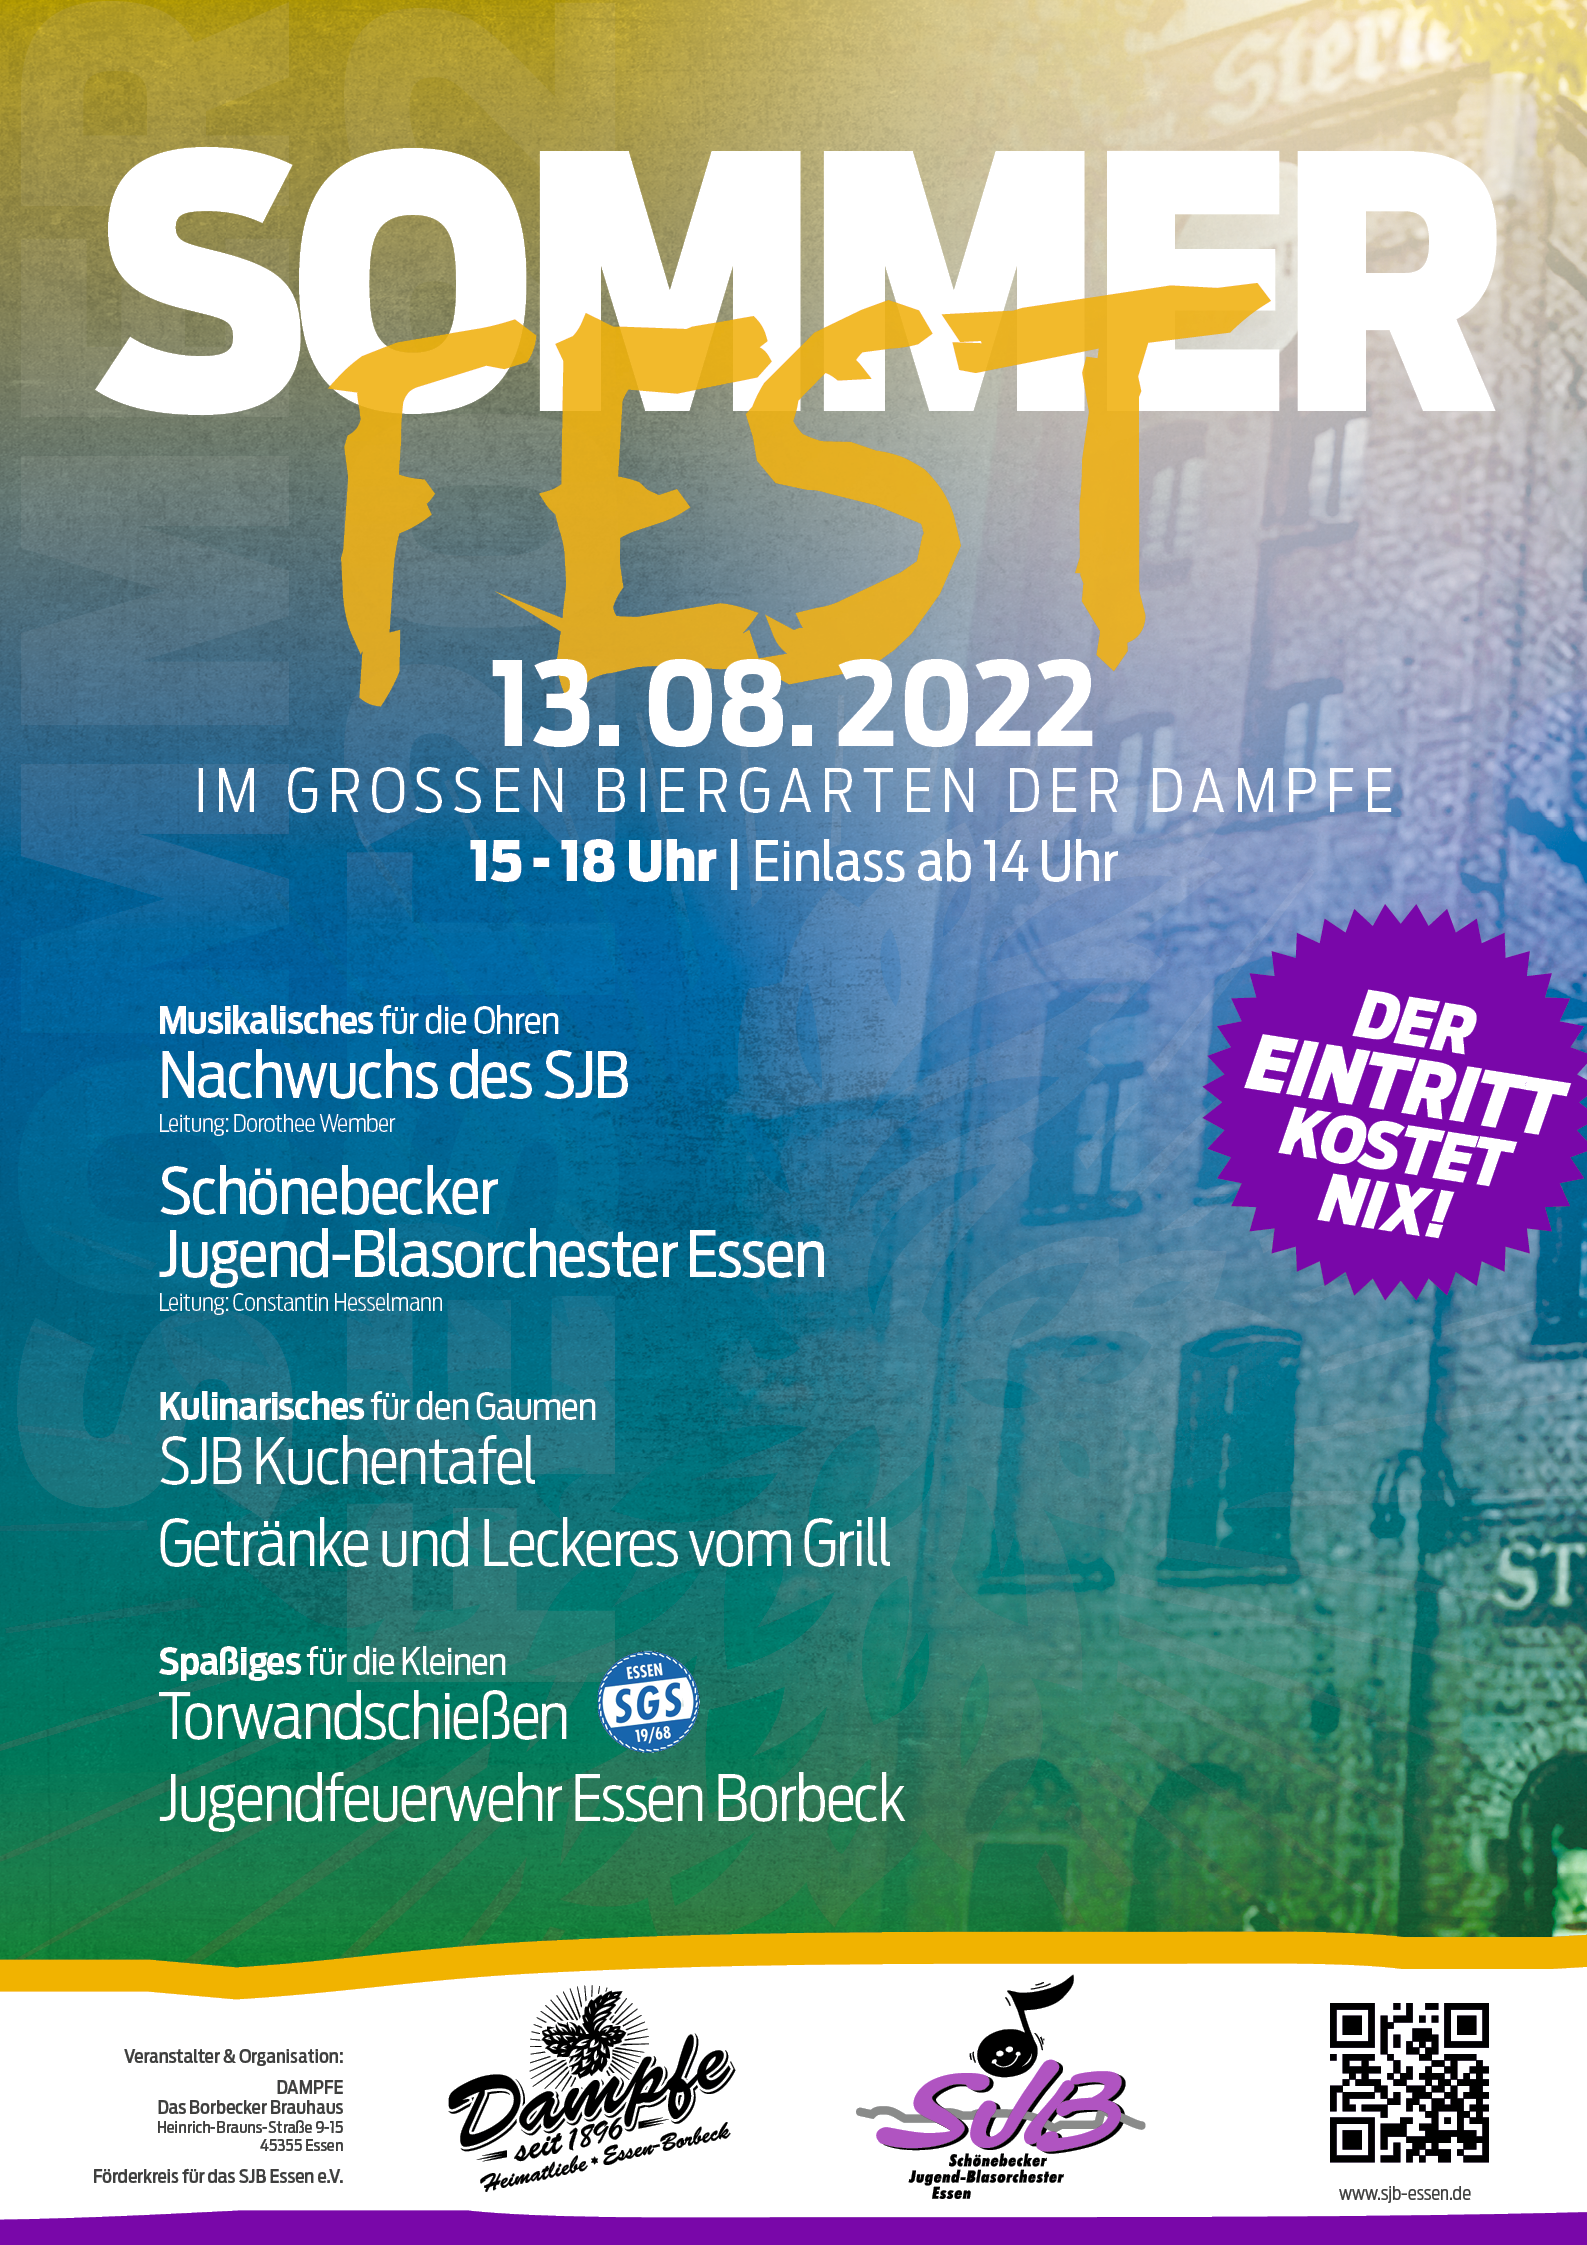 You are currently viewing Sommerfest in der Dampfe